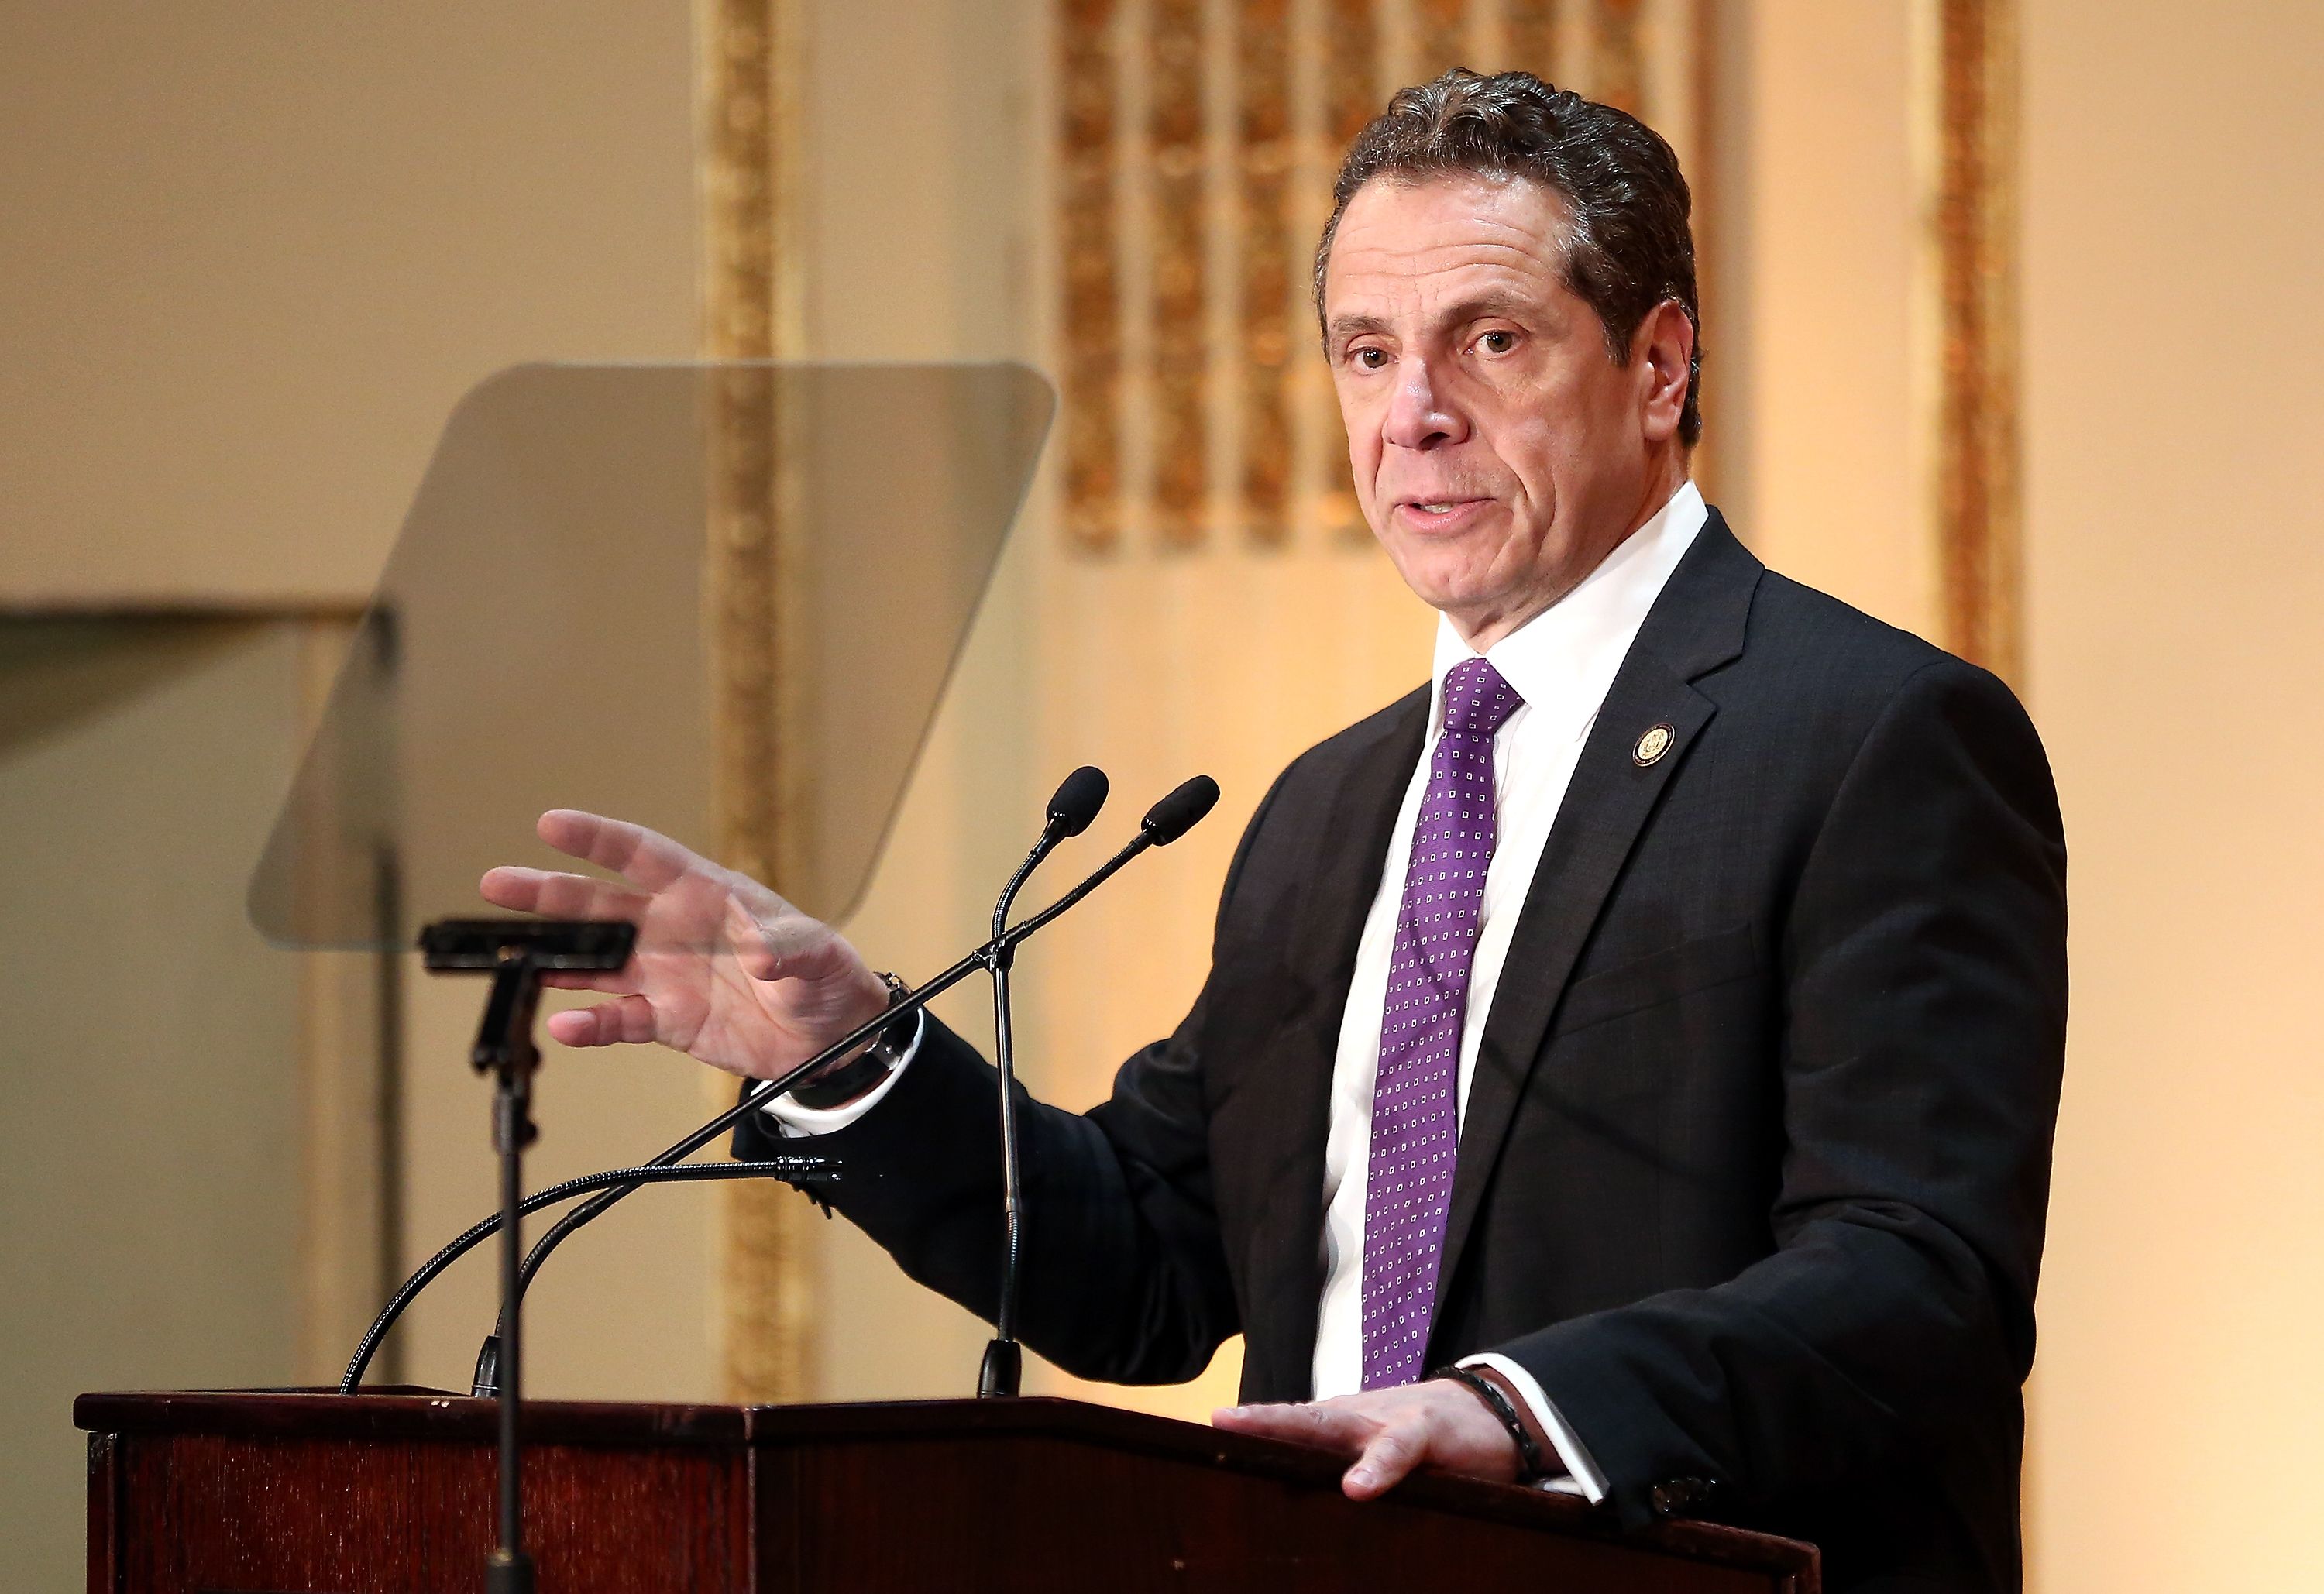 Governor of New York State Andrew Cuomo speaks on stage at the HELP USA 30th Anniversary Event at The Plaza Hotel on March 16, 2017 | Photo: Getty Images